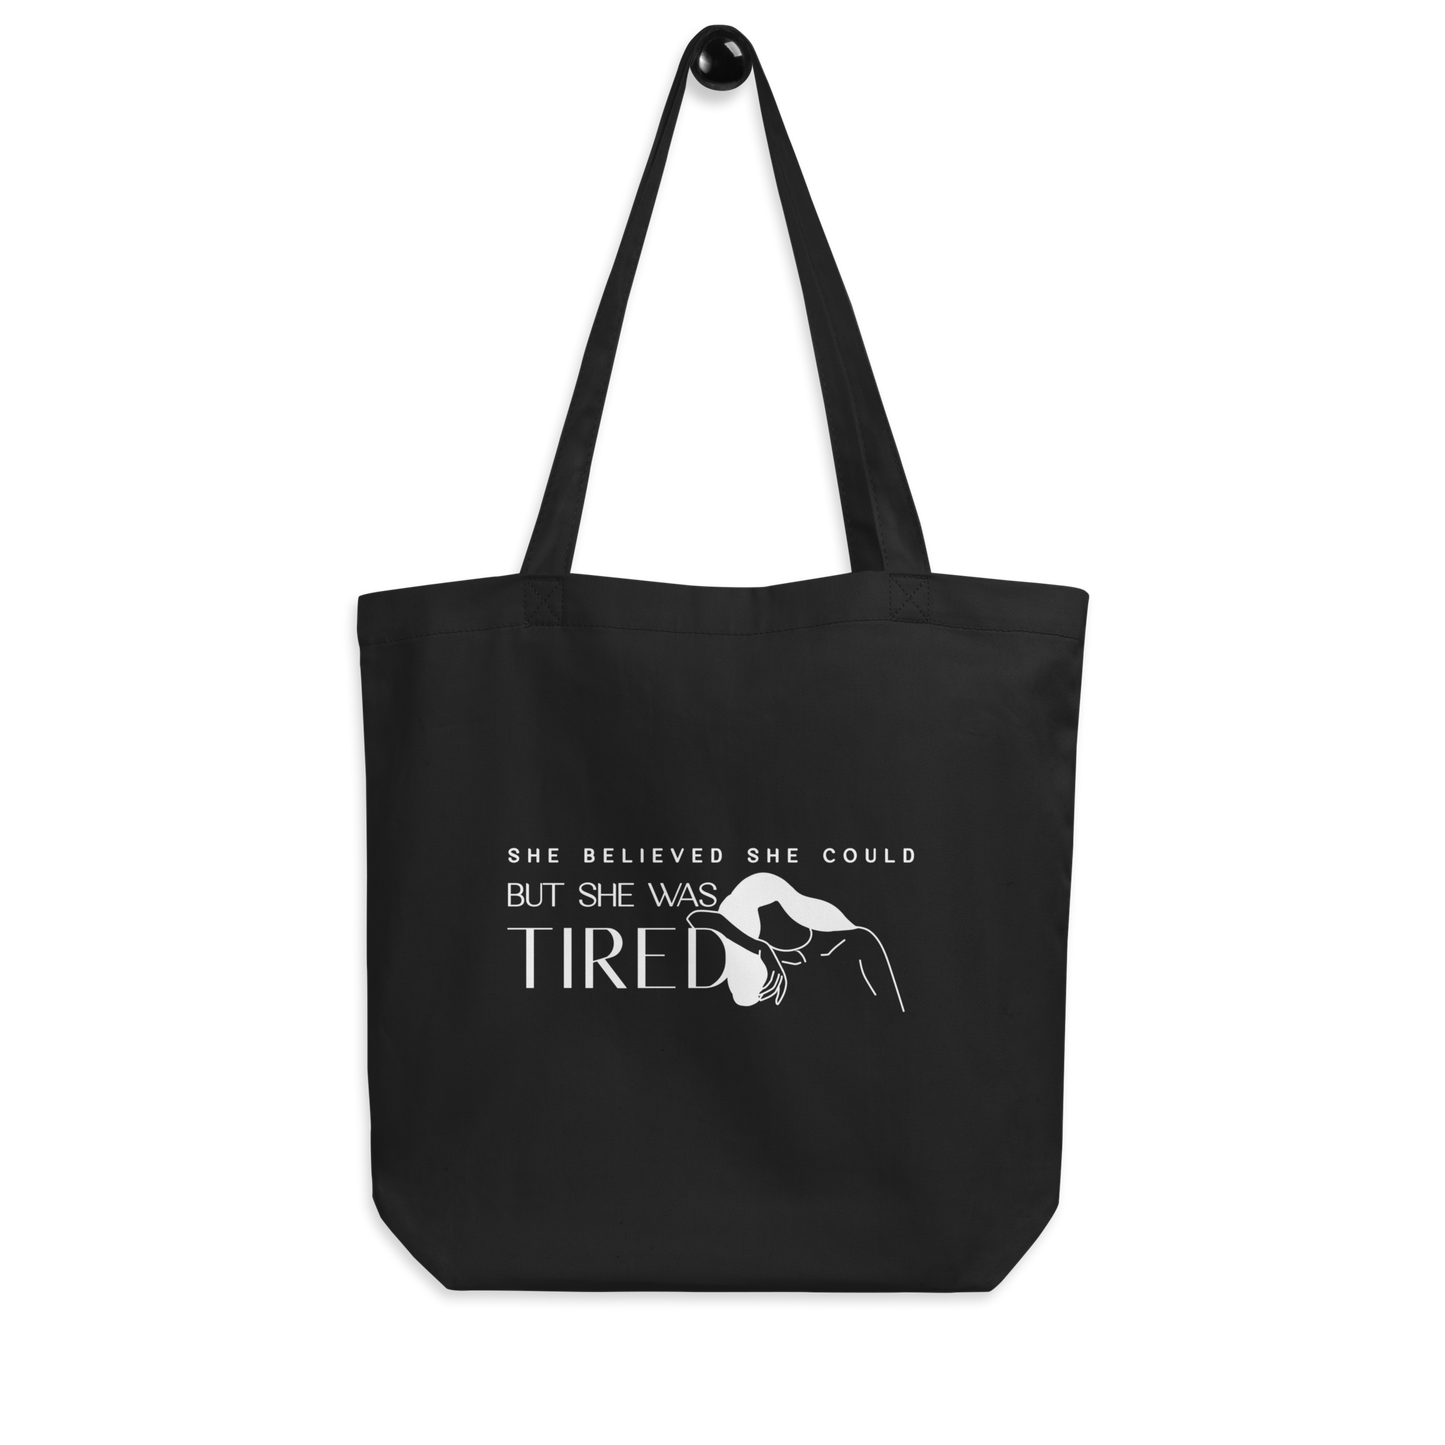 She Believed She Could But She Was Tired Tote